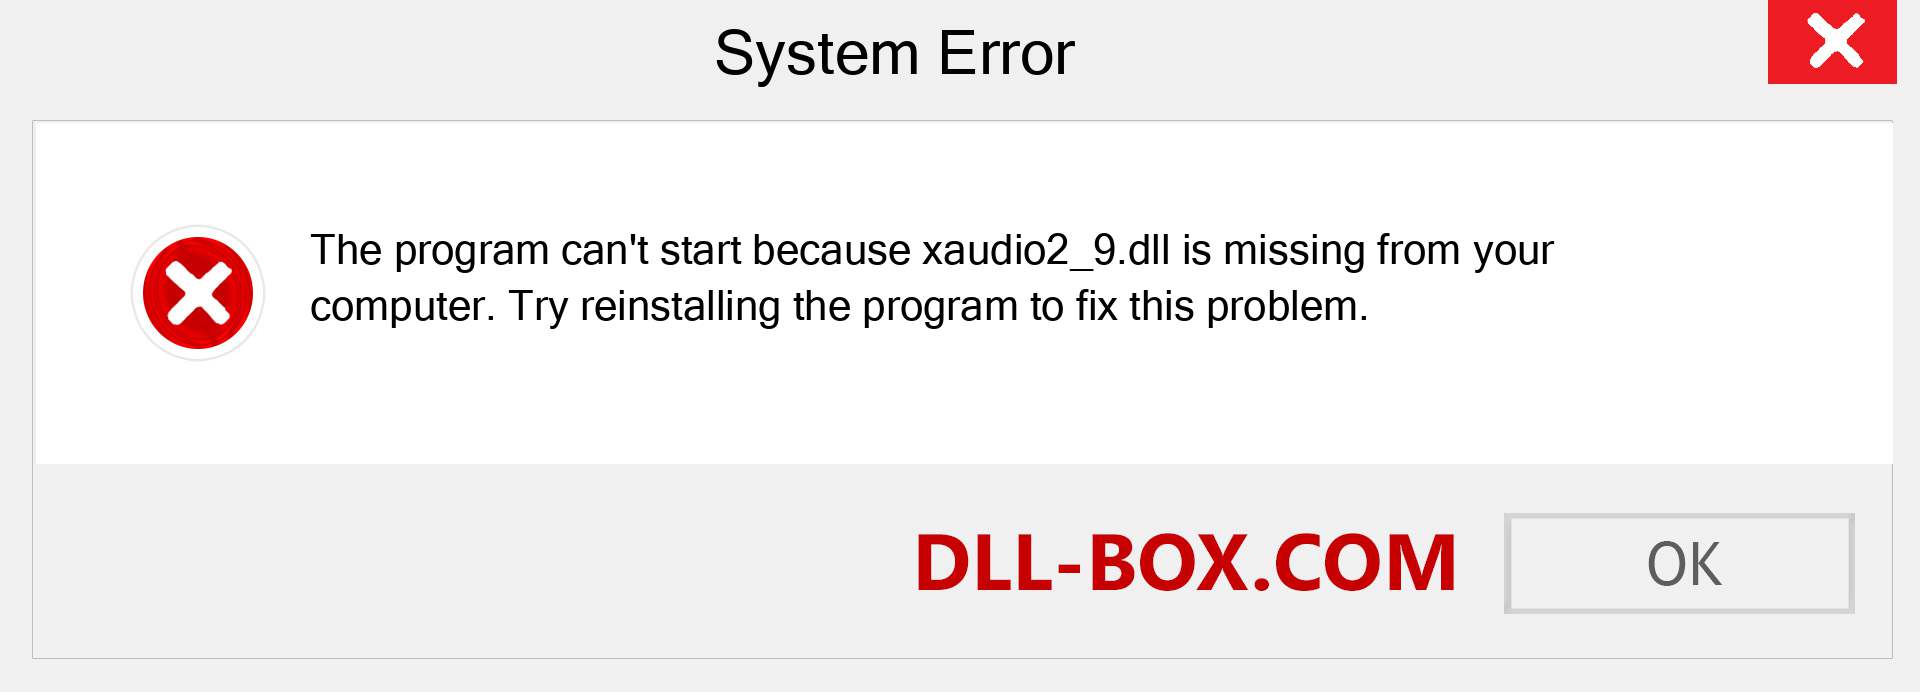  xaudio2_9.dll file is missing?. Download for Windows 7, 8, 10 - Fix  xaudio2_9 dll Missing Error on Windows, photos, images